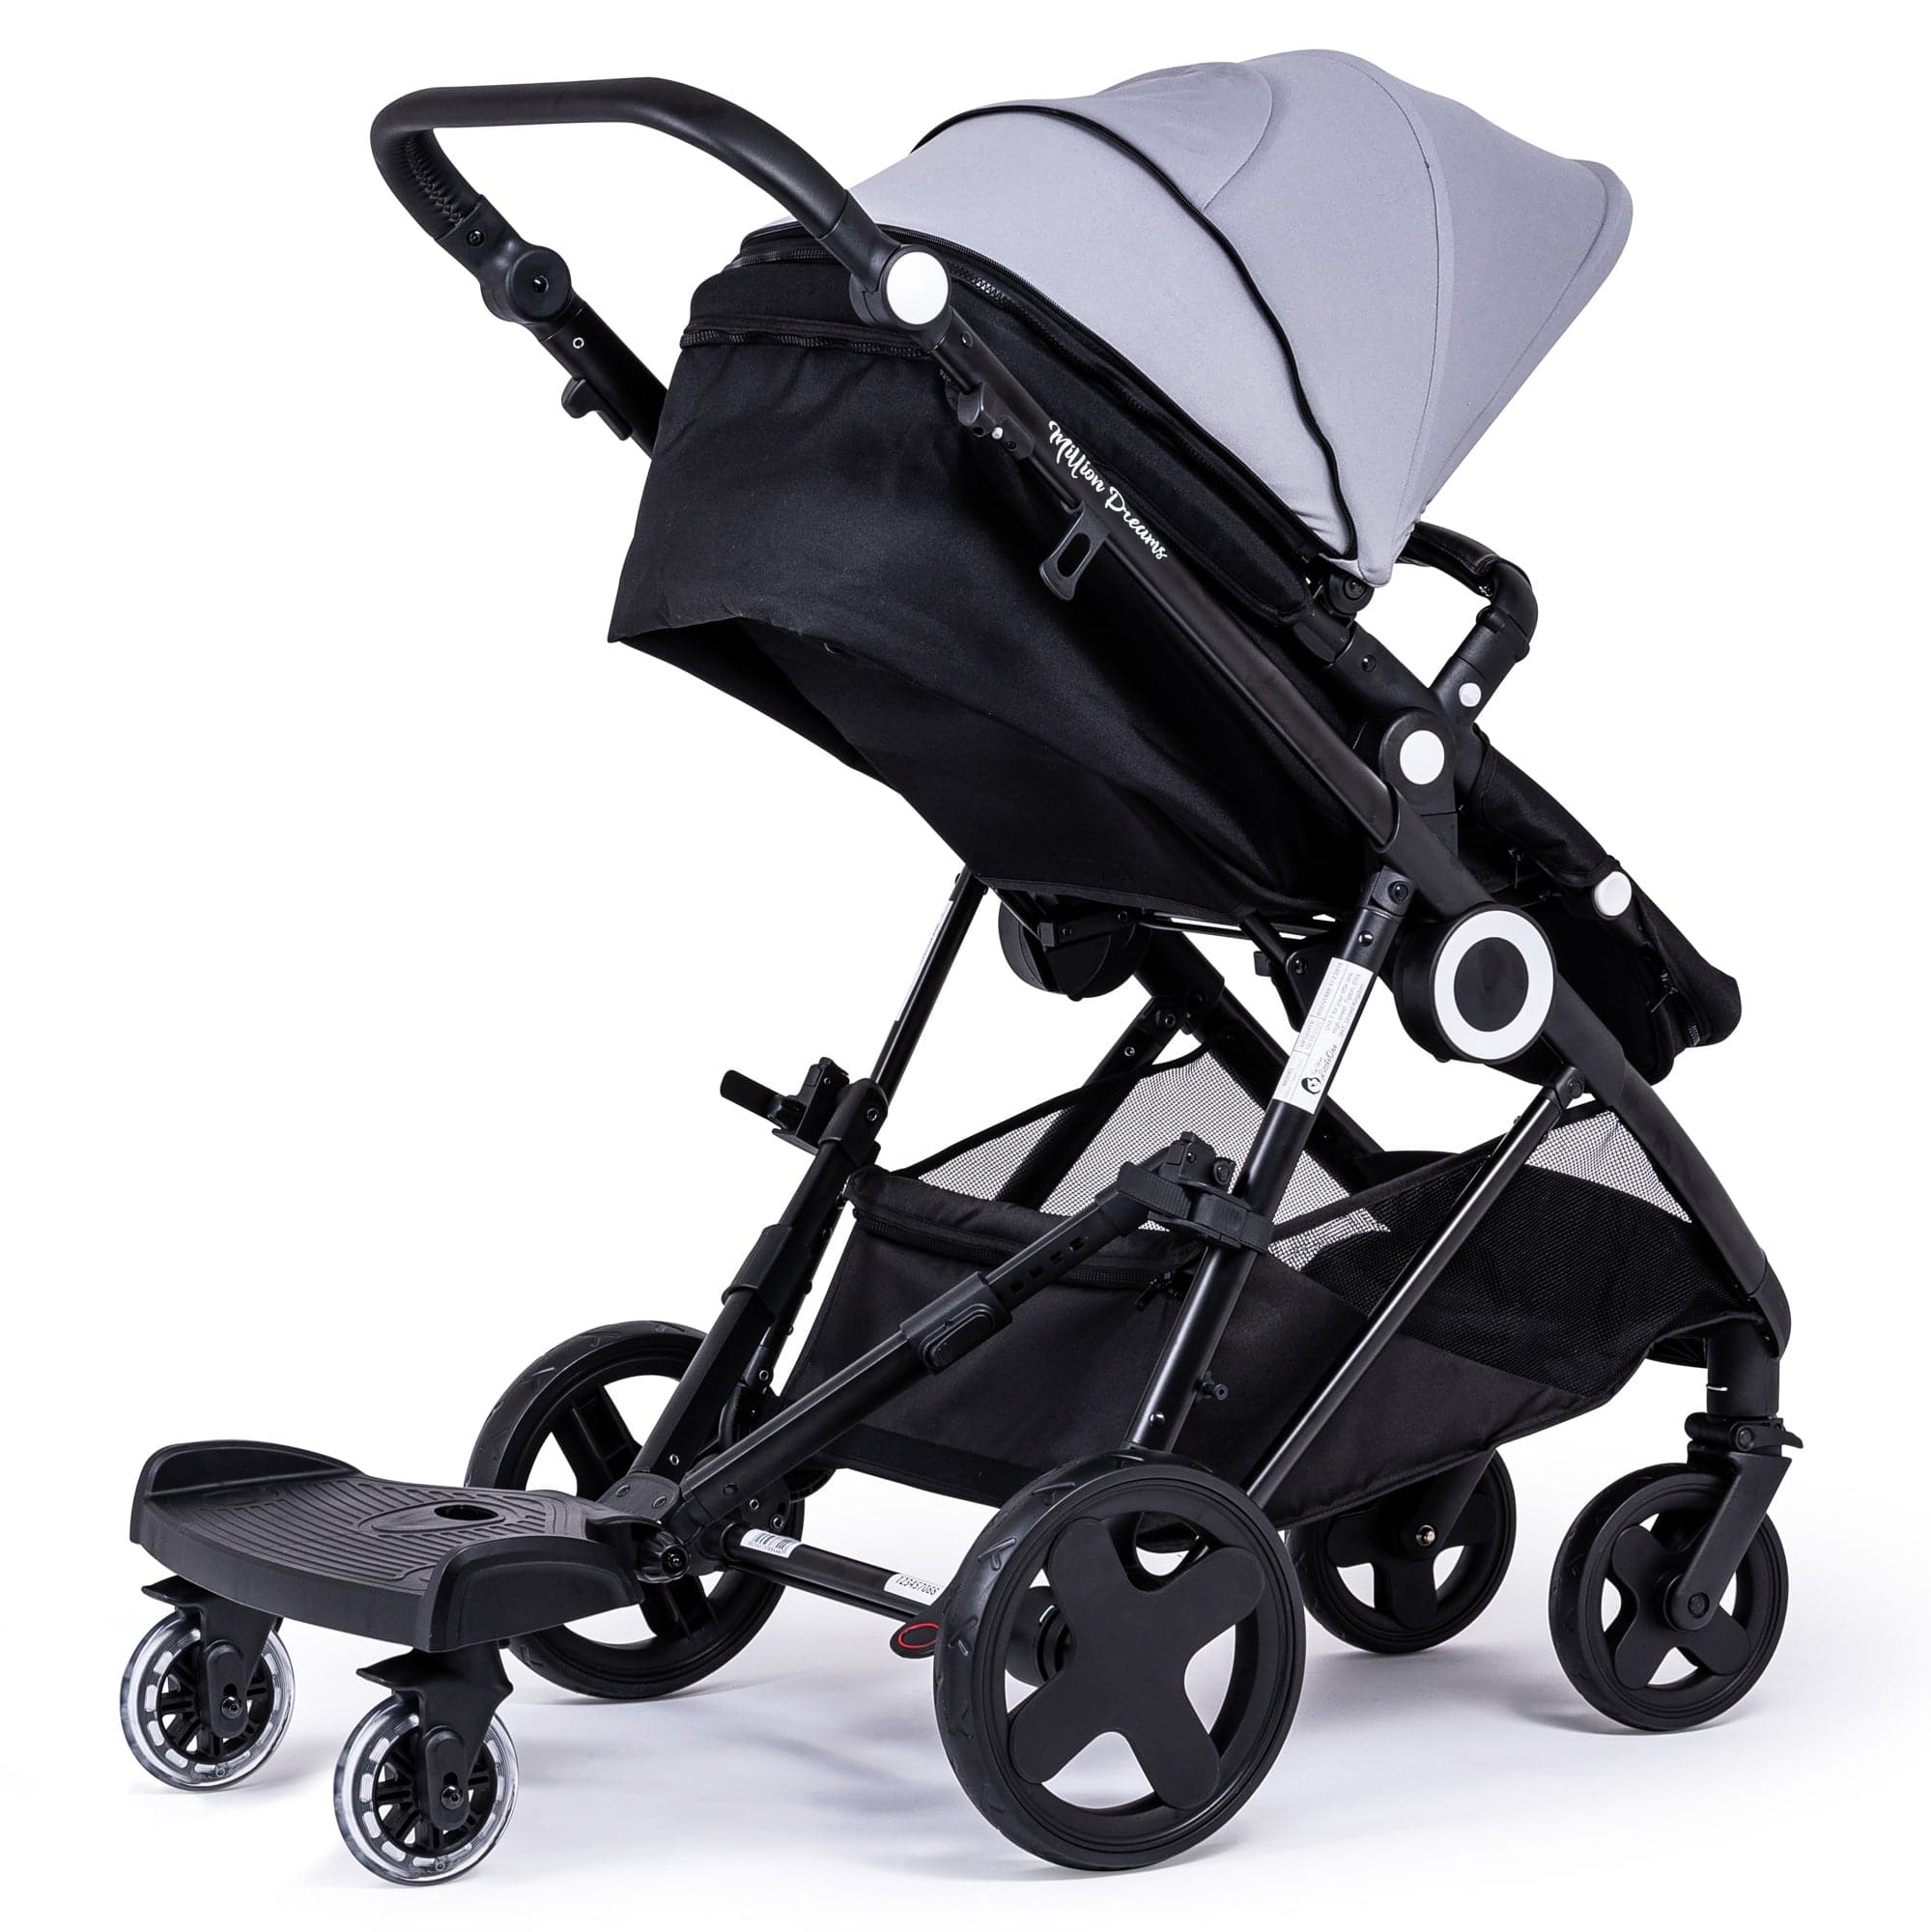 Ride On Board with Saddle Compatible with Bugaboo - For Your Little One